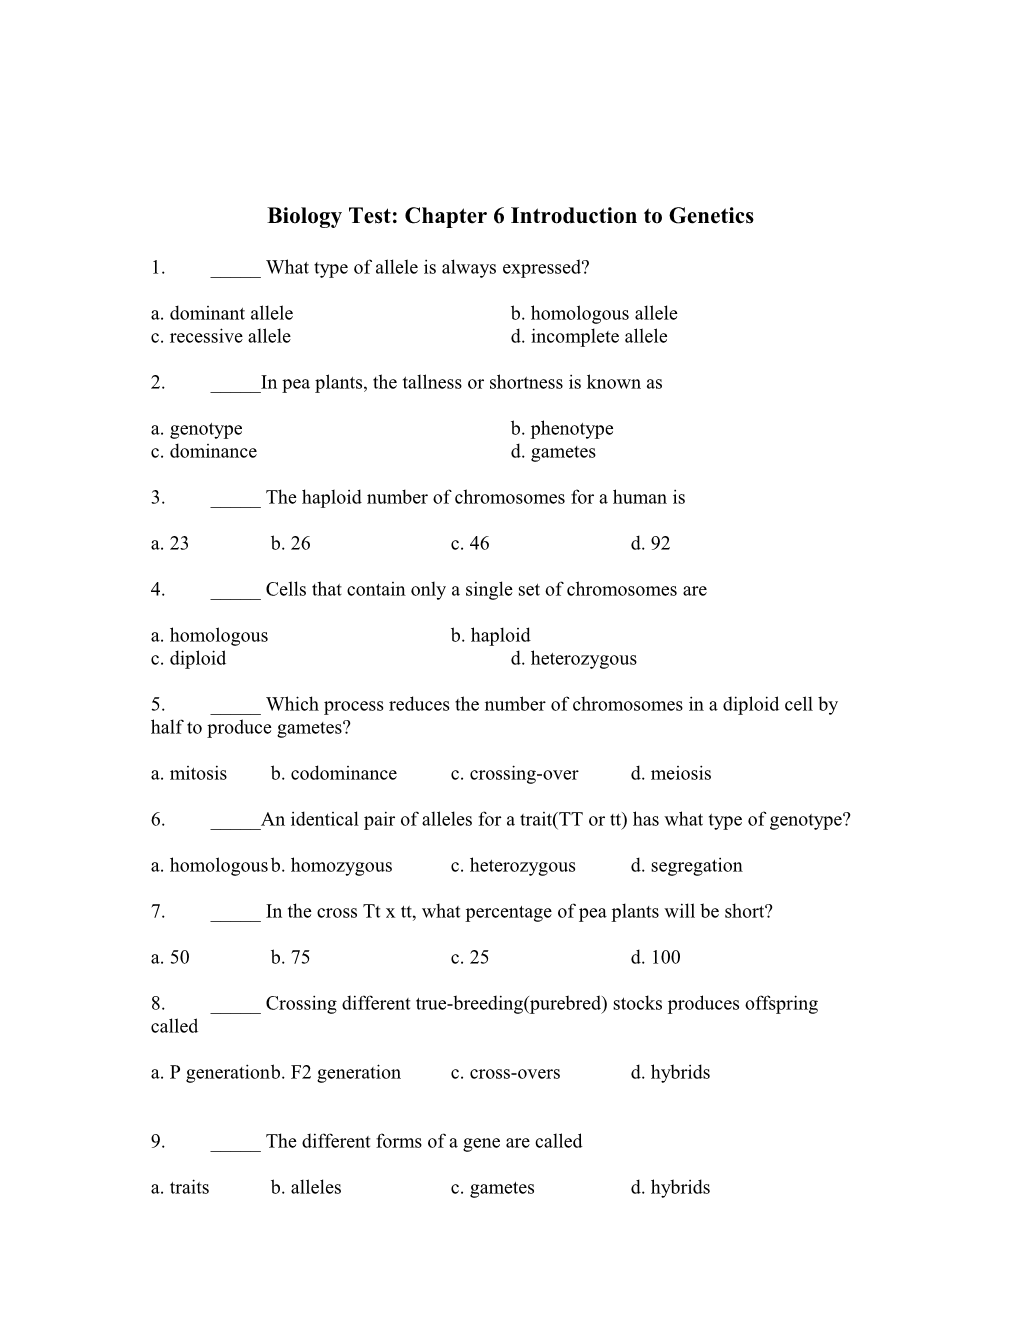 Biology Test: Chapter 6 Introduction to Genetics